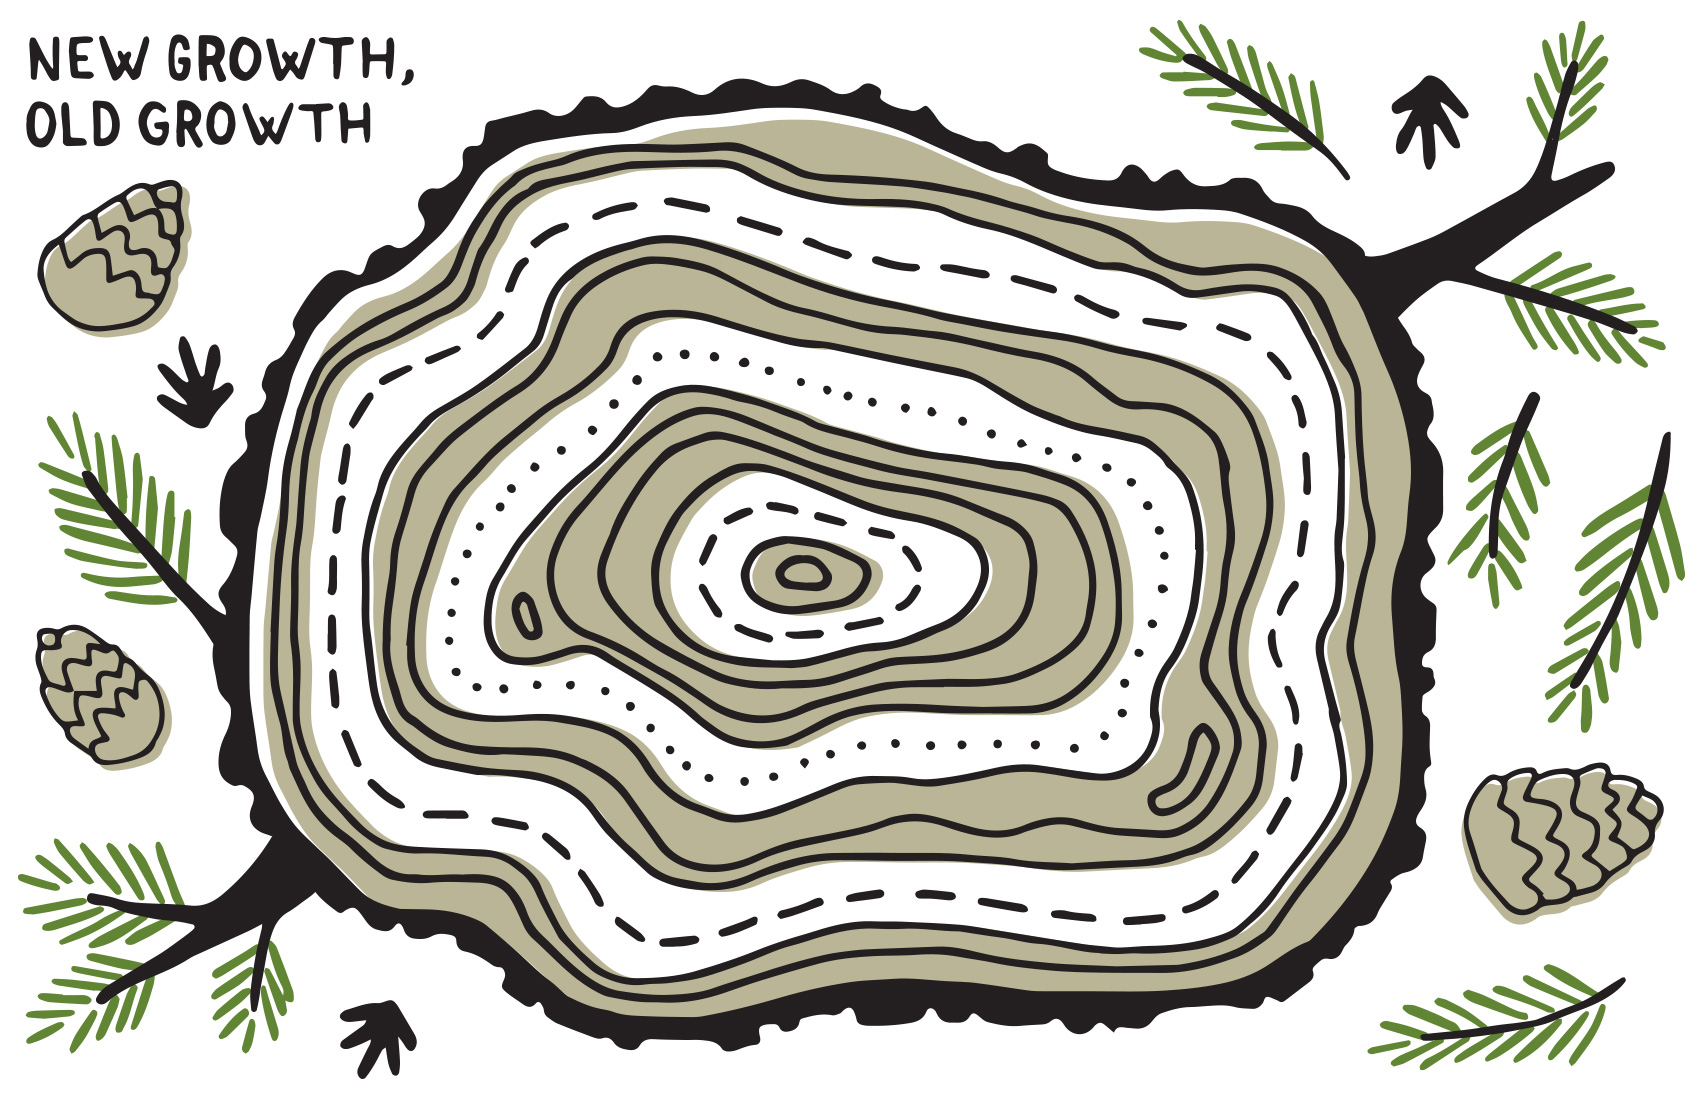 old growth, new growth: illustration of tree rings and topography